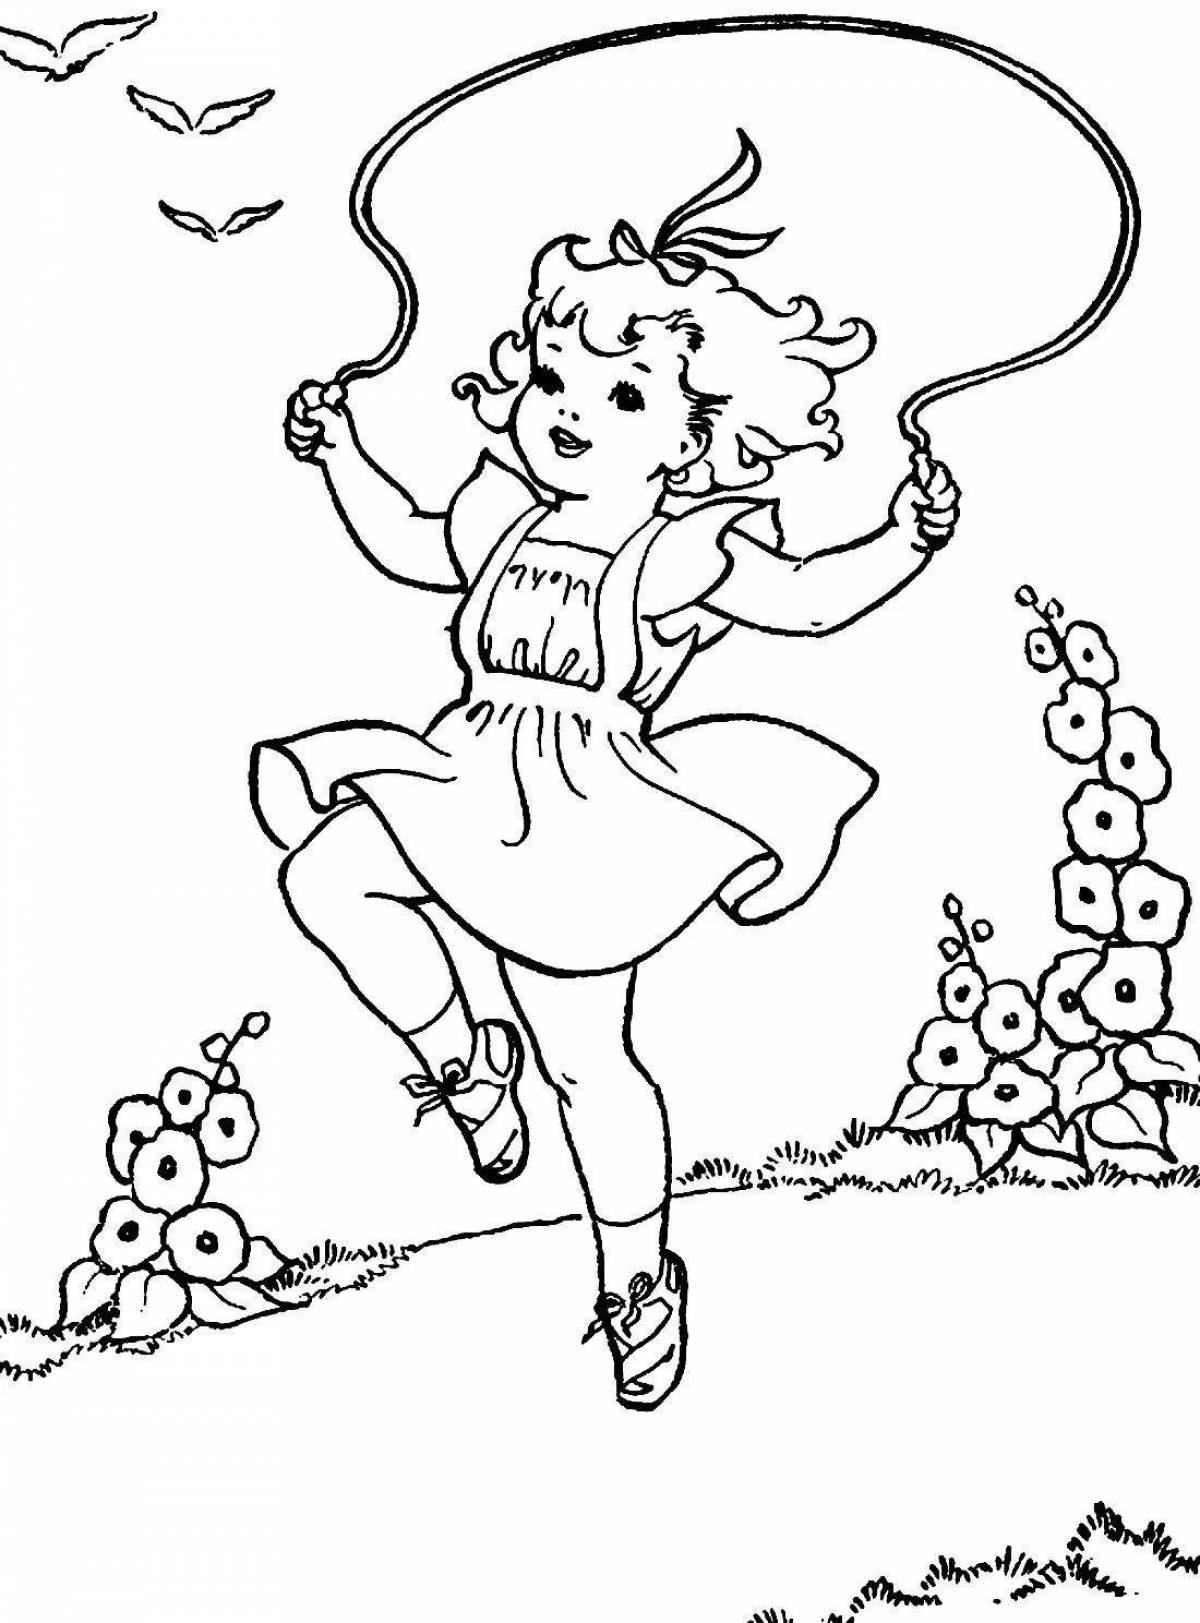 Fun coloring page for jumping